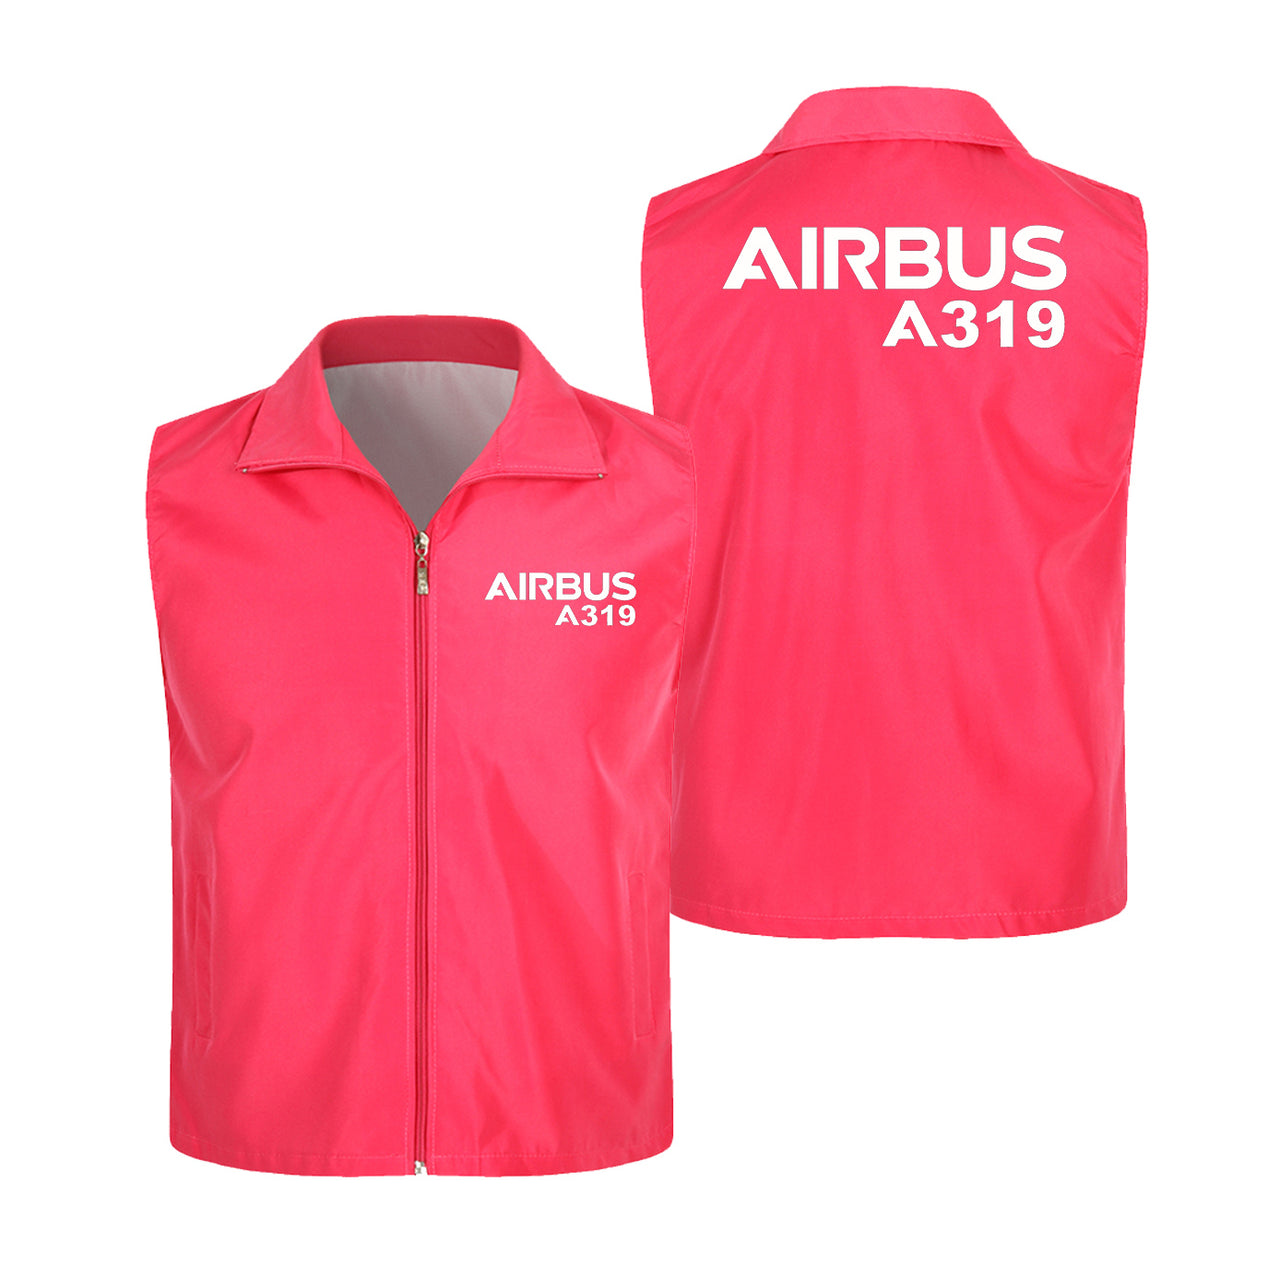 Airbus A319 & Text Designed Thin Style Vests